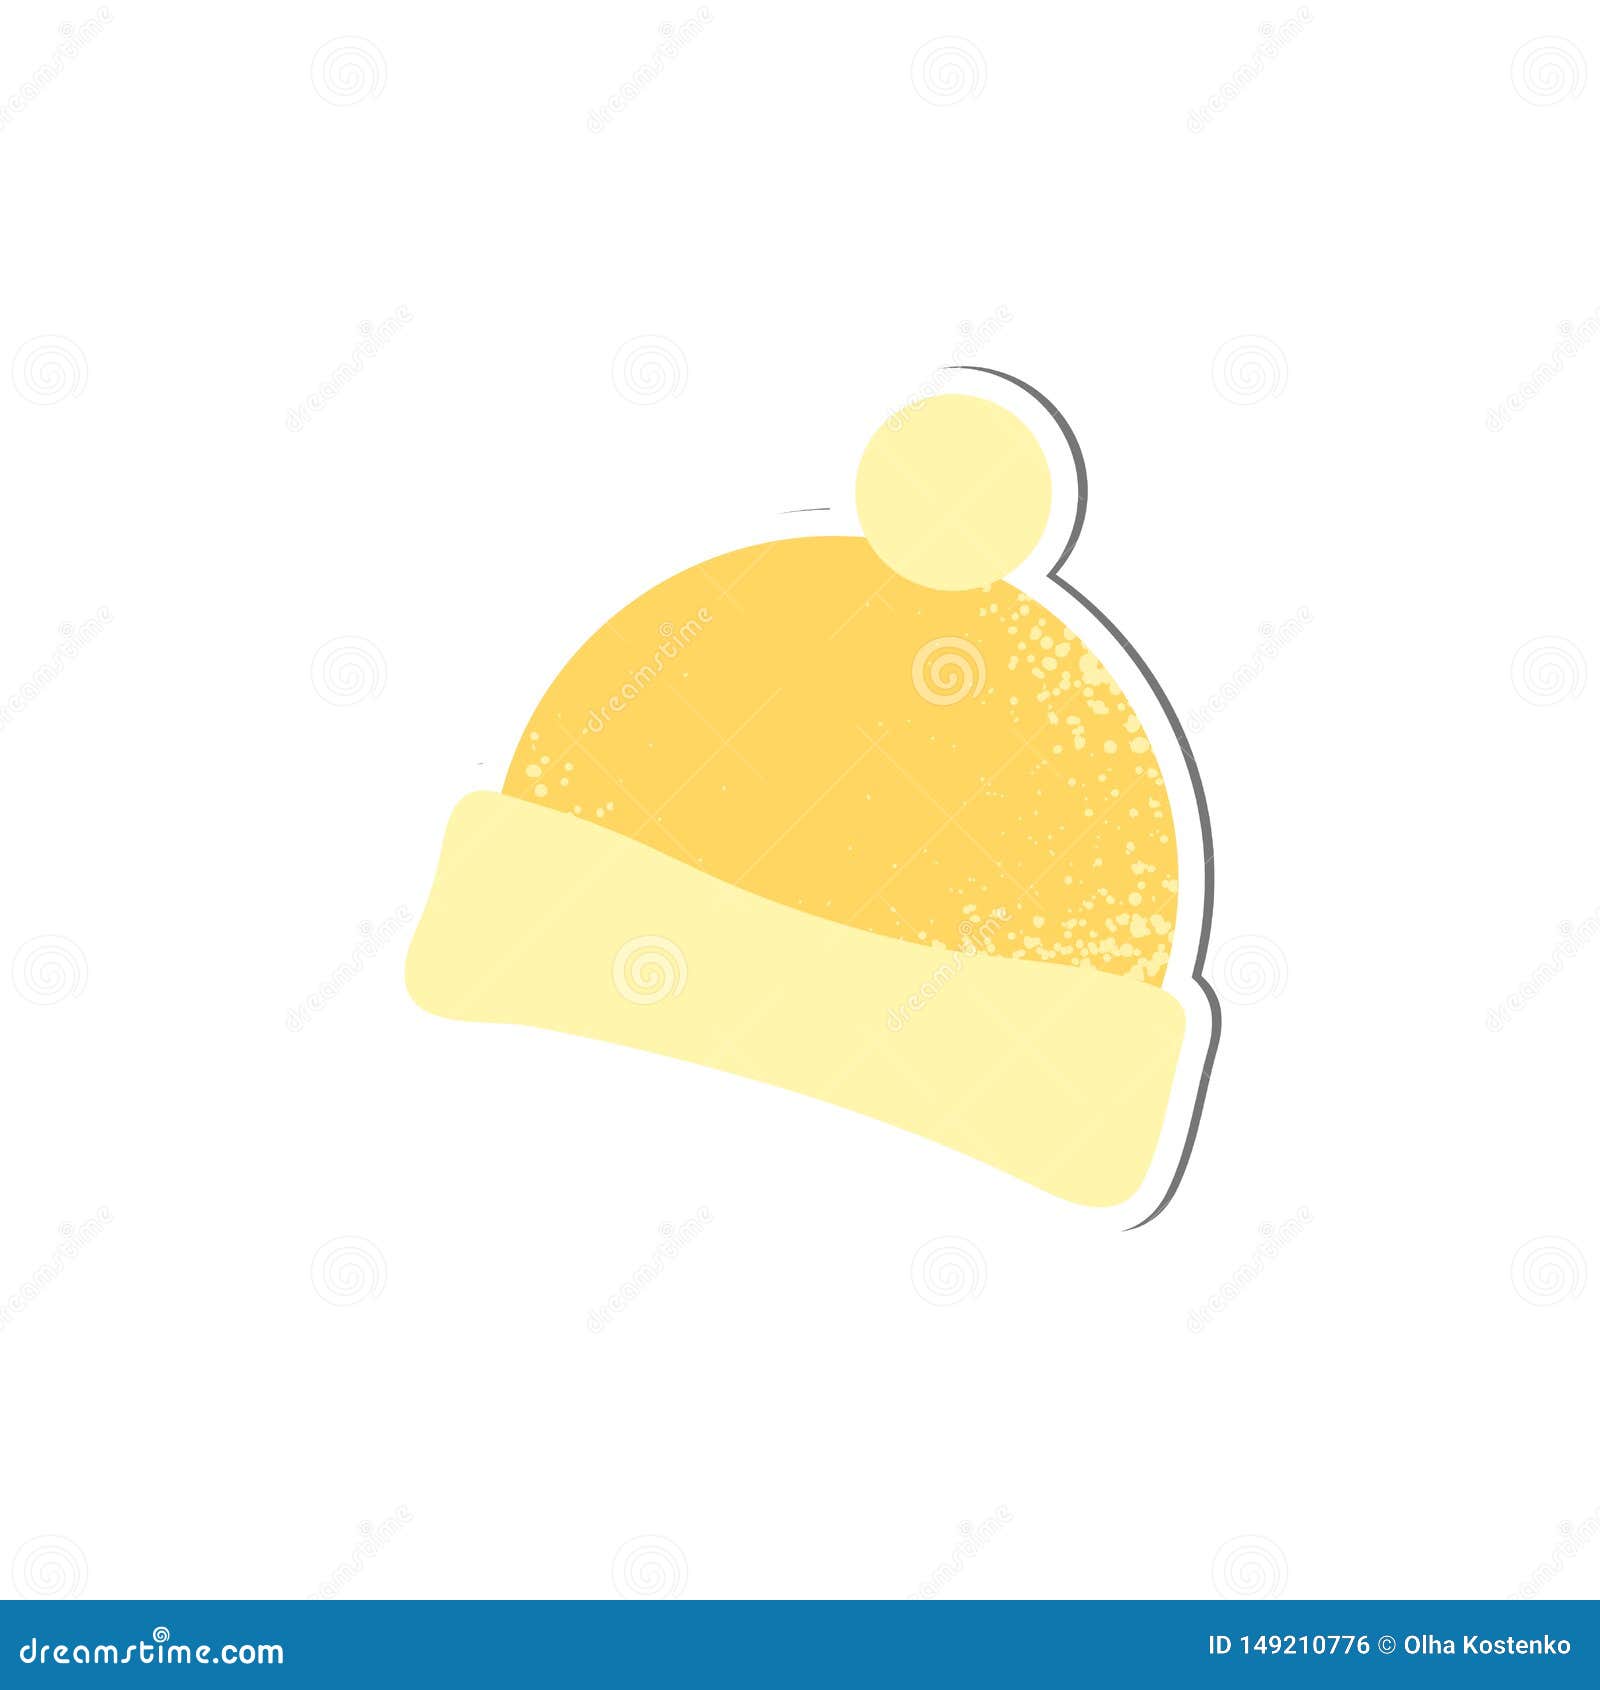 Isolated Cute Baby Sleep Hat Vector Stock Vector - Illustration of shower,  icon: 149210776